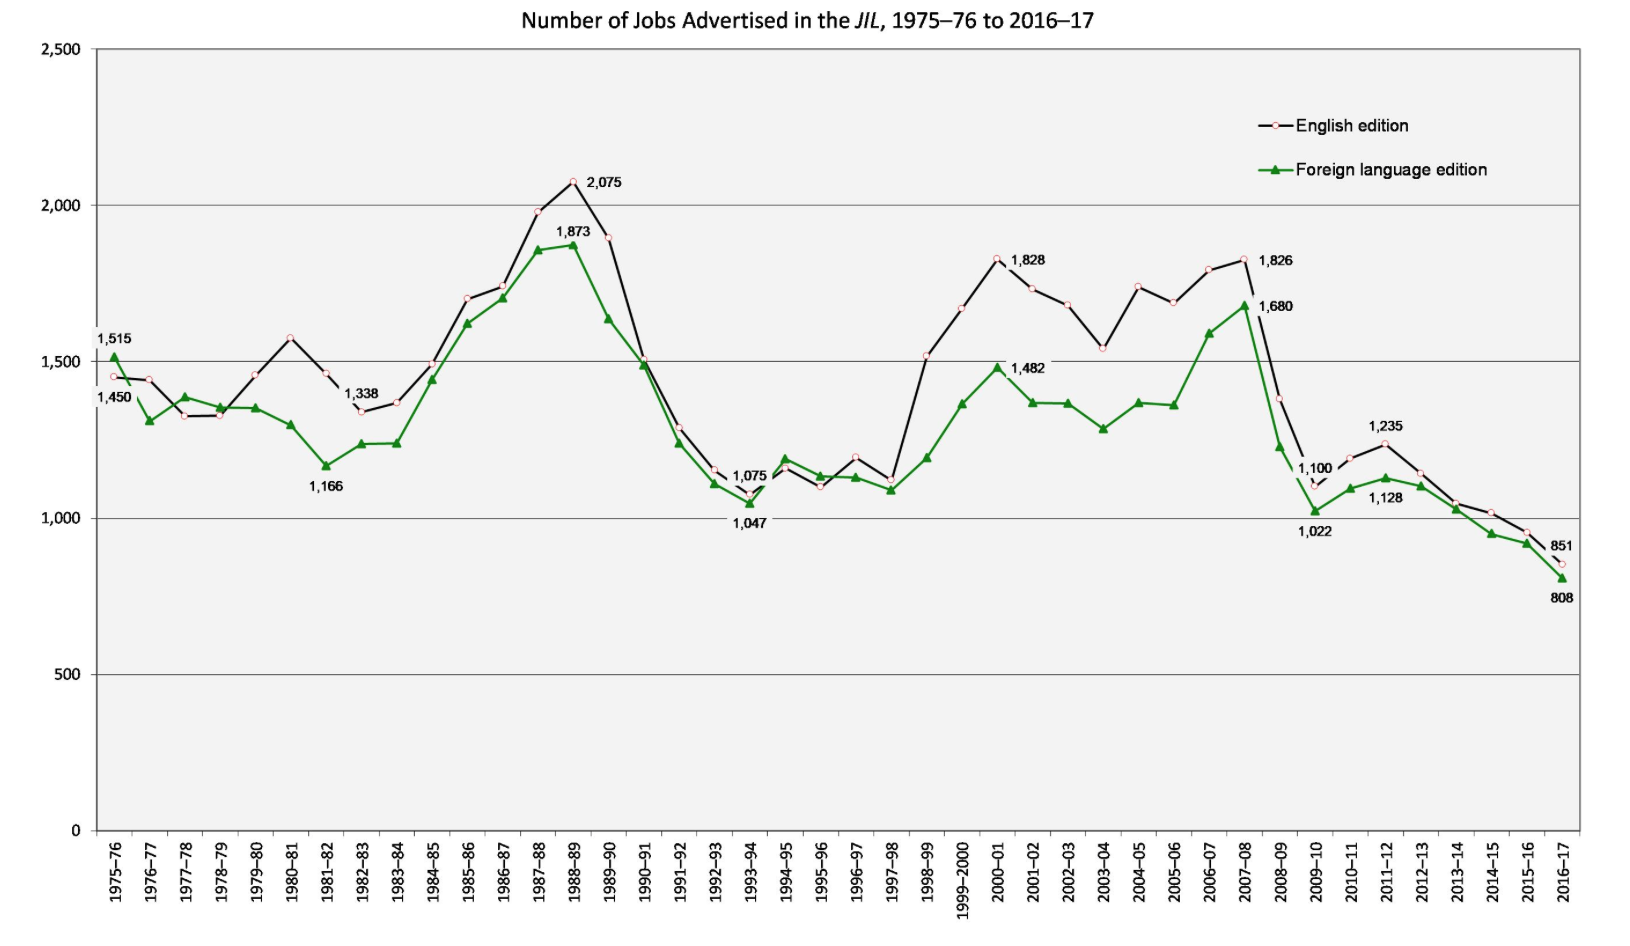 Number of Jobs Advertised in the JIL, 1975-76 to 2016-17. Line graph shows changes in English and foreign language jobs. In 1975-76, there were 1,450 English jobs, 1,338 in 1982-83, 2,075 in 1988-89, 1,075 in 1993-94, 1,828 in 2000-01, 1,826 in 2007-08, 1,100 in 2009-10, 1,235 in 2011-12, and 851 in 2016-17. In 1975-76, there were 1,515 foreign language jobs, 1,166 in 1981-82, 1,873 in 1988-89, 1,047 in 1993-94, 1,482 in 2000-01, 1,680 in 2007-08, 1,022 in 2009-10, 1,128 in 2011-12, and 808 in 2016-17.